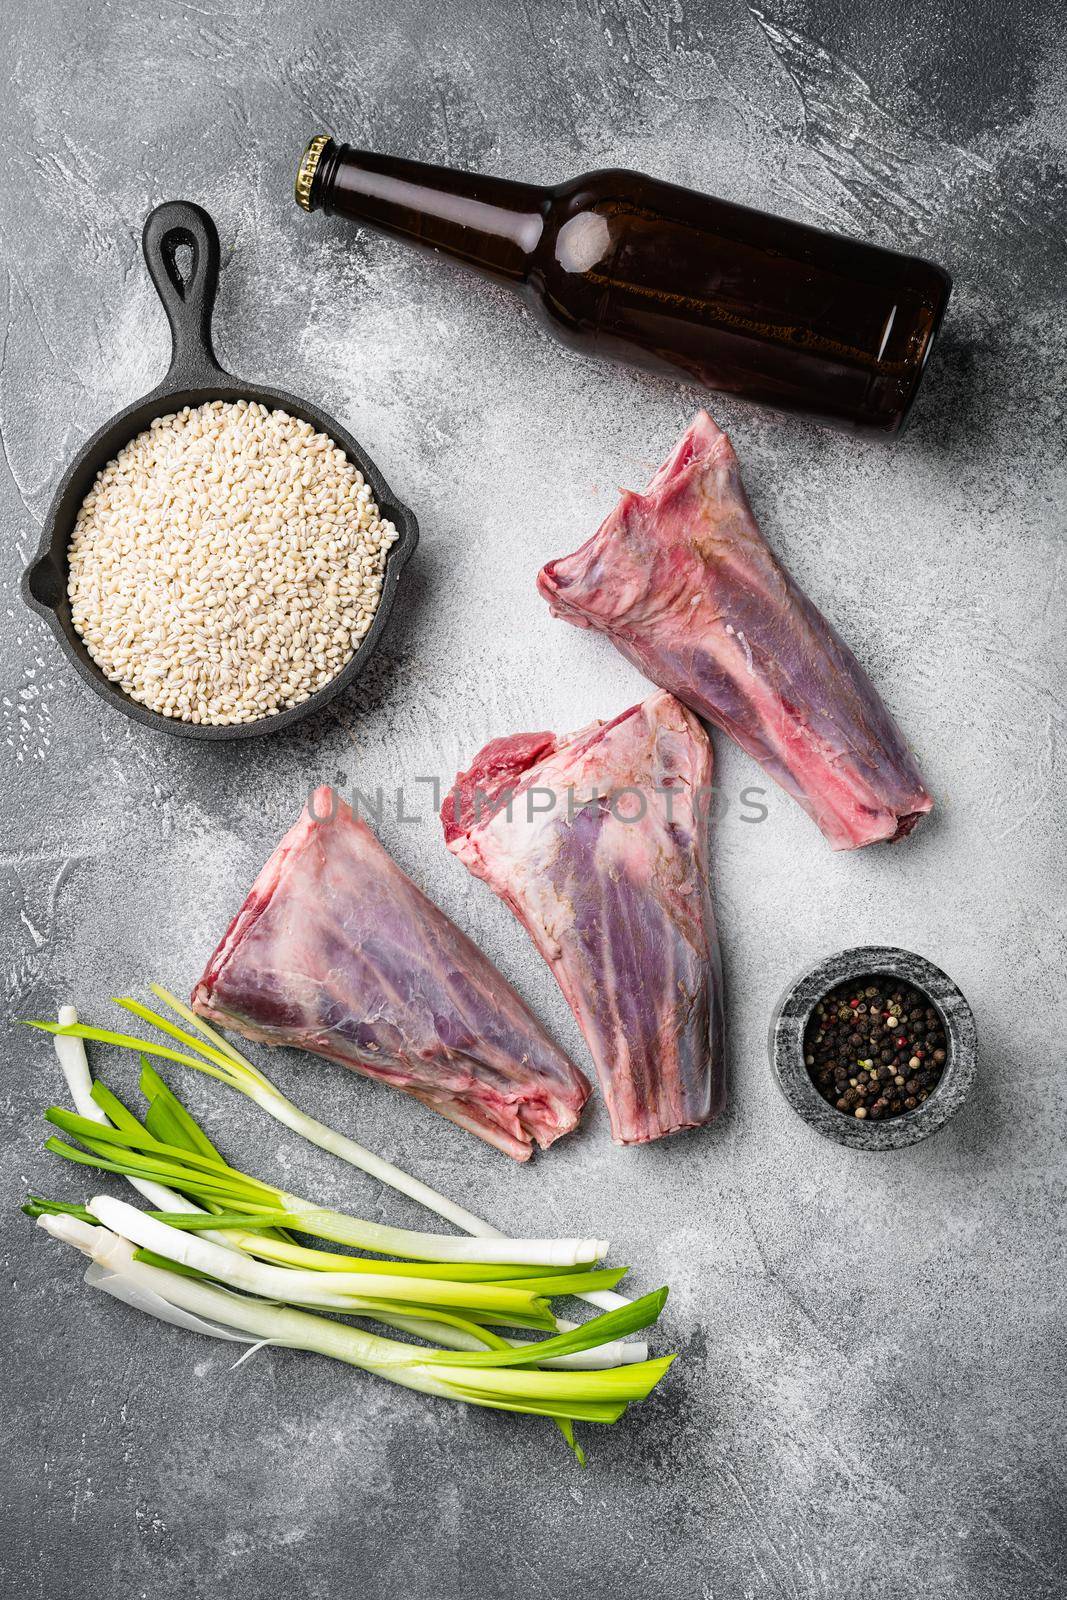 Raw lamb shanks with pearl barley and ale, on gray stone table background, top view flat lay by Ilianesolenyi